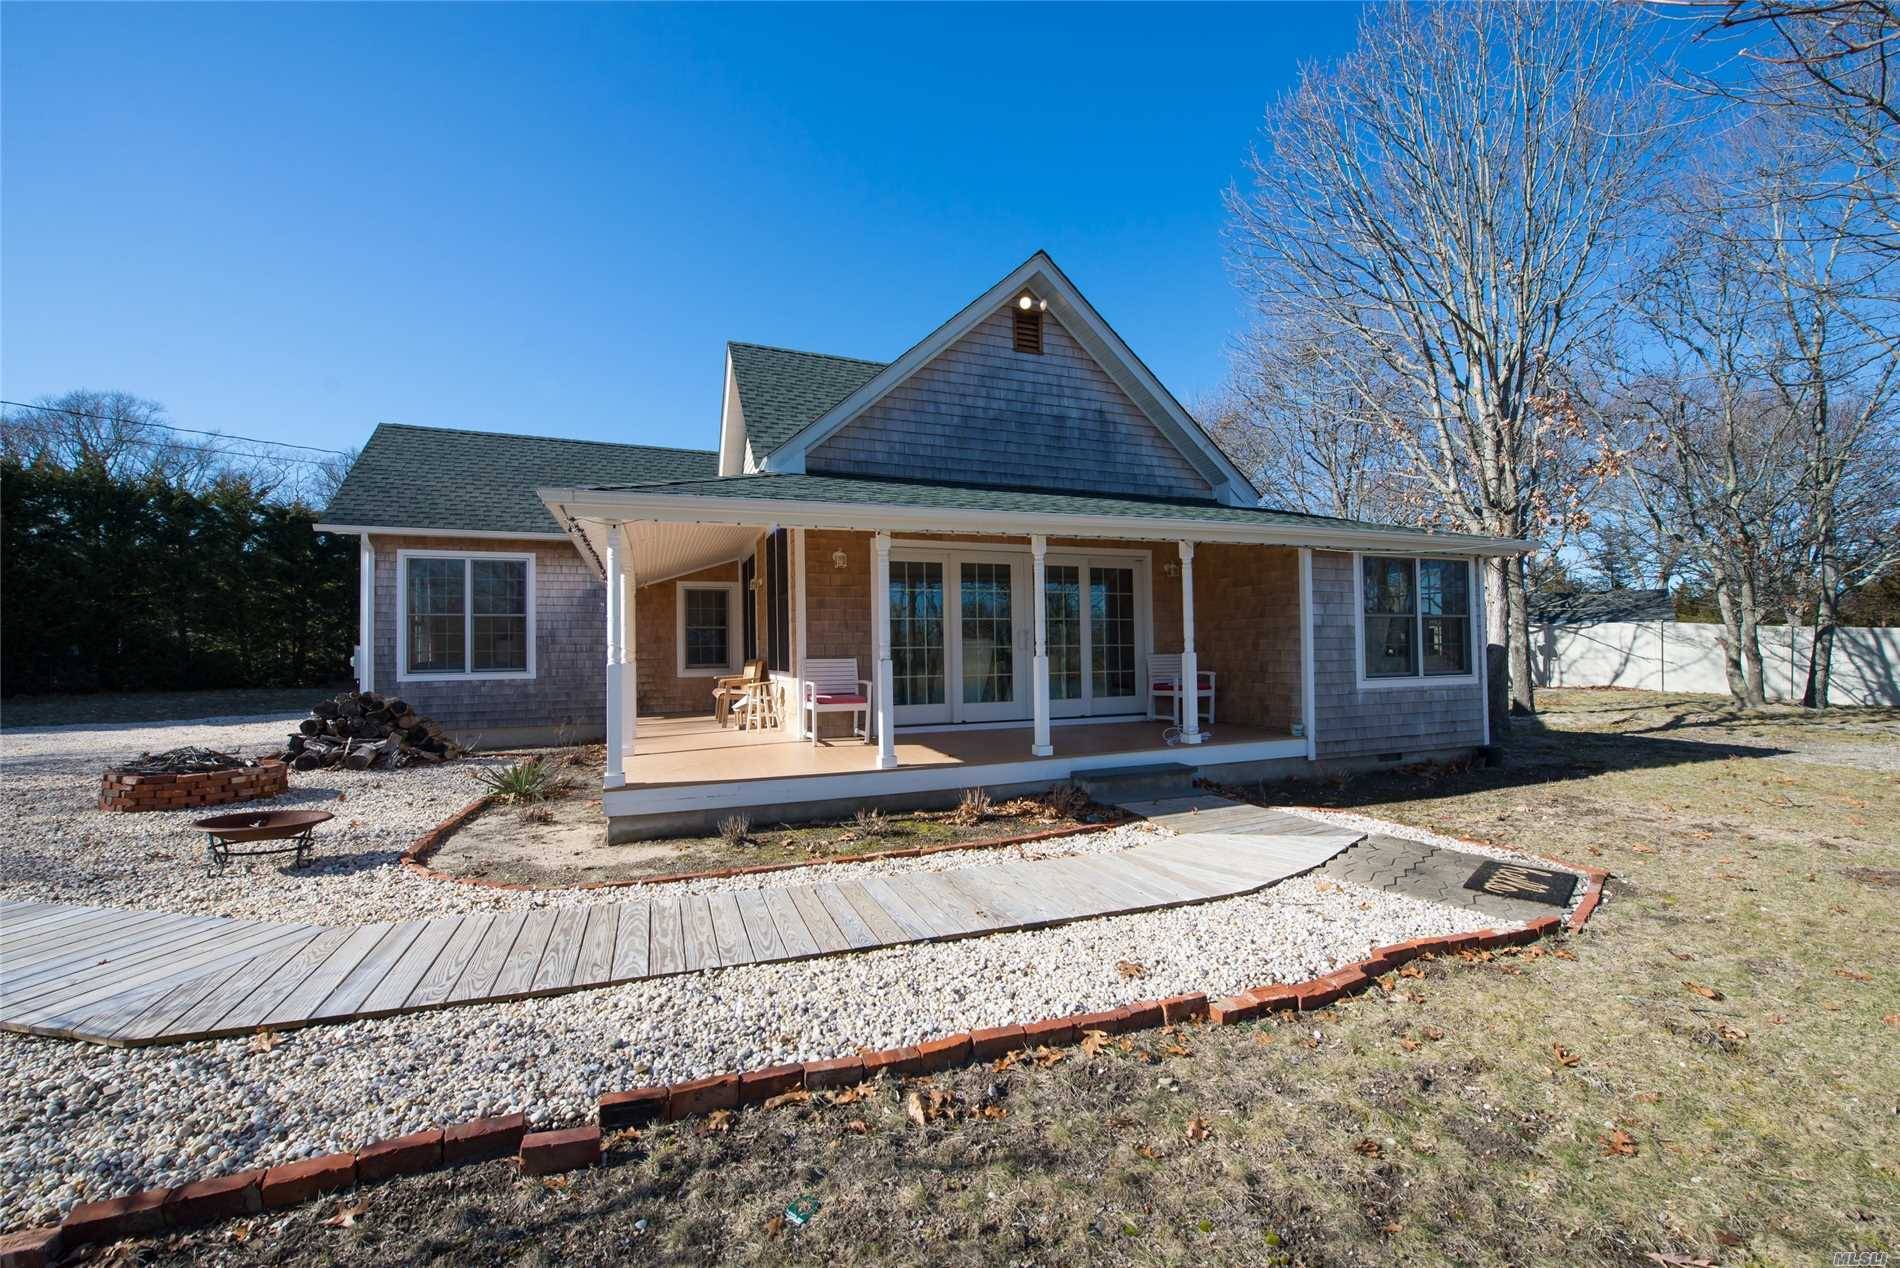 Waterfront Ranch Set Back On Over An Acre Of Property With Its Own Deep Water Dock.